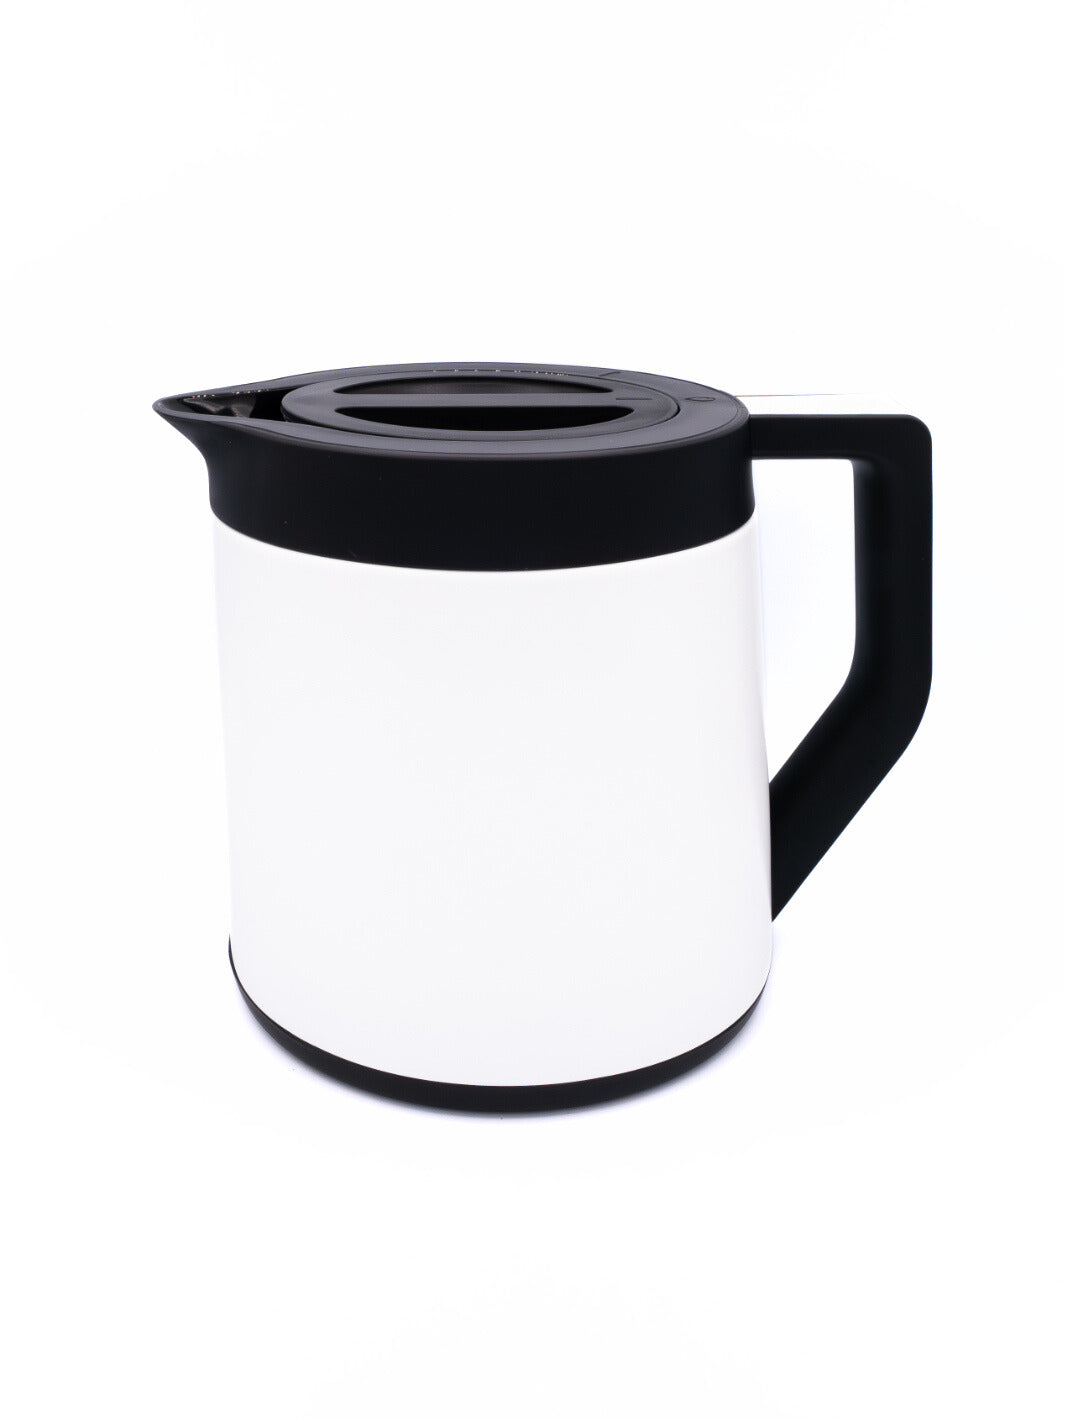 RATIO Six Thermal Carafe and Lid (Series 2)